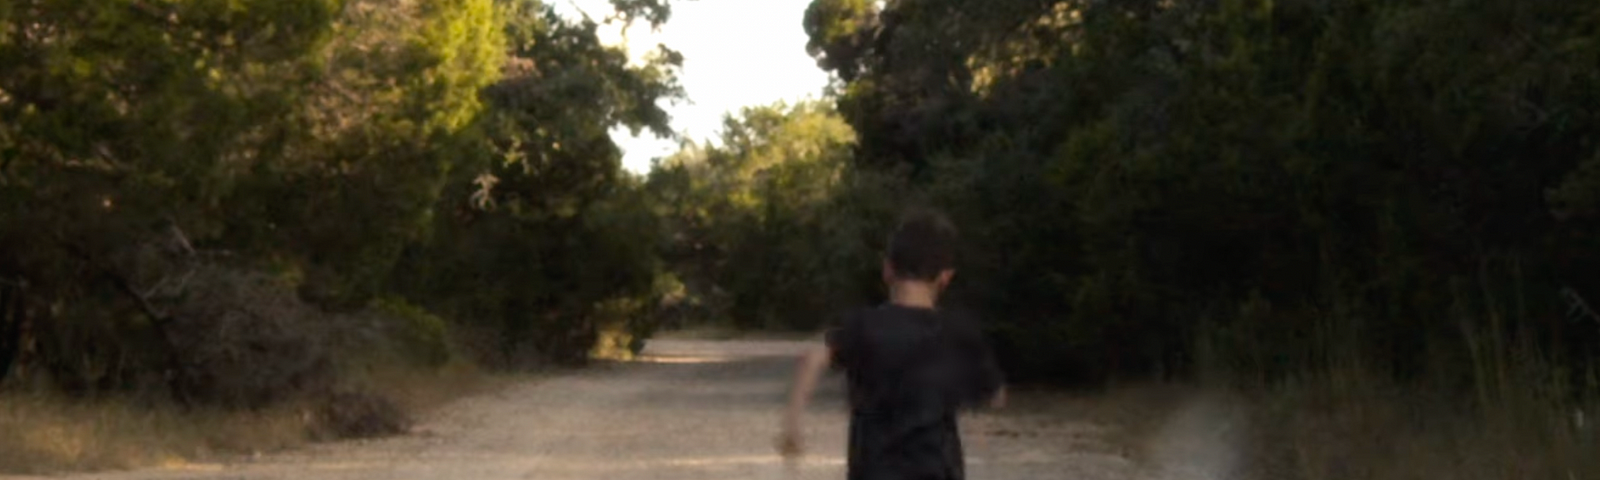 Photo of a young boy running down a road in the woods.